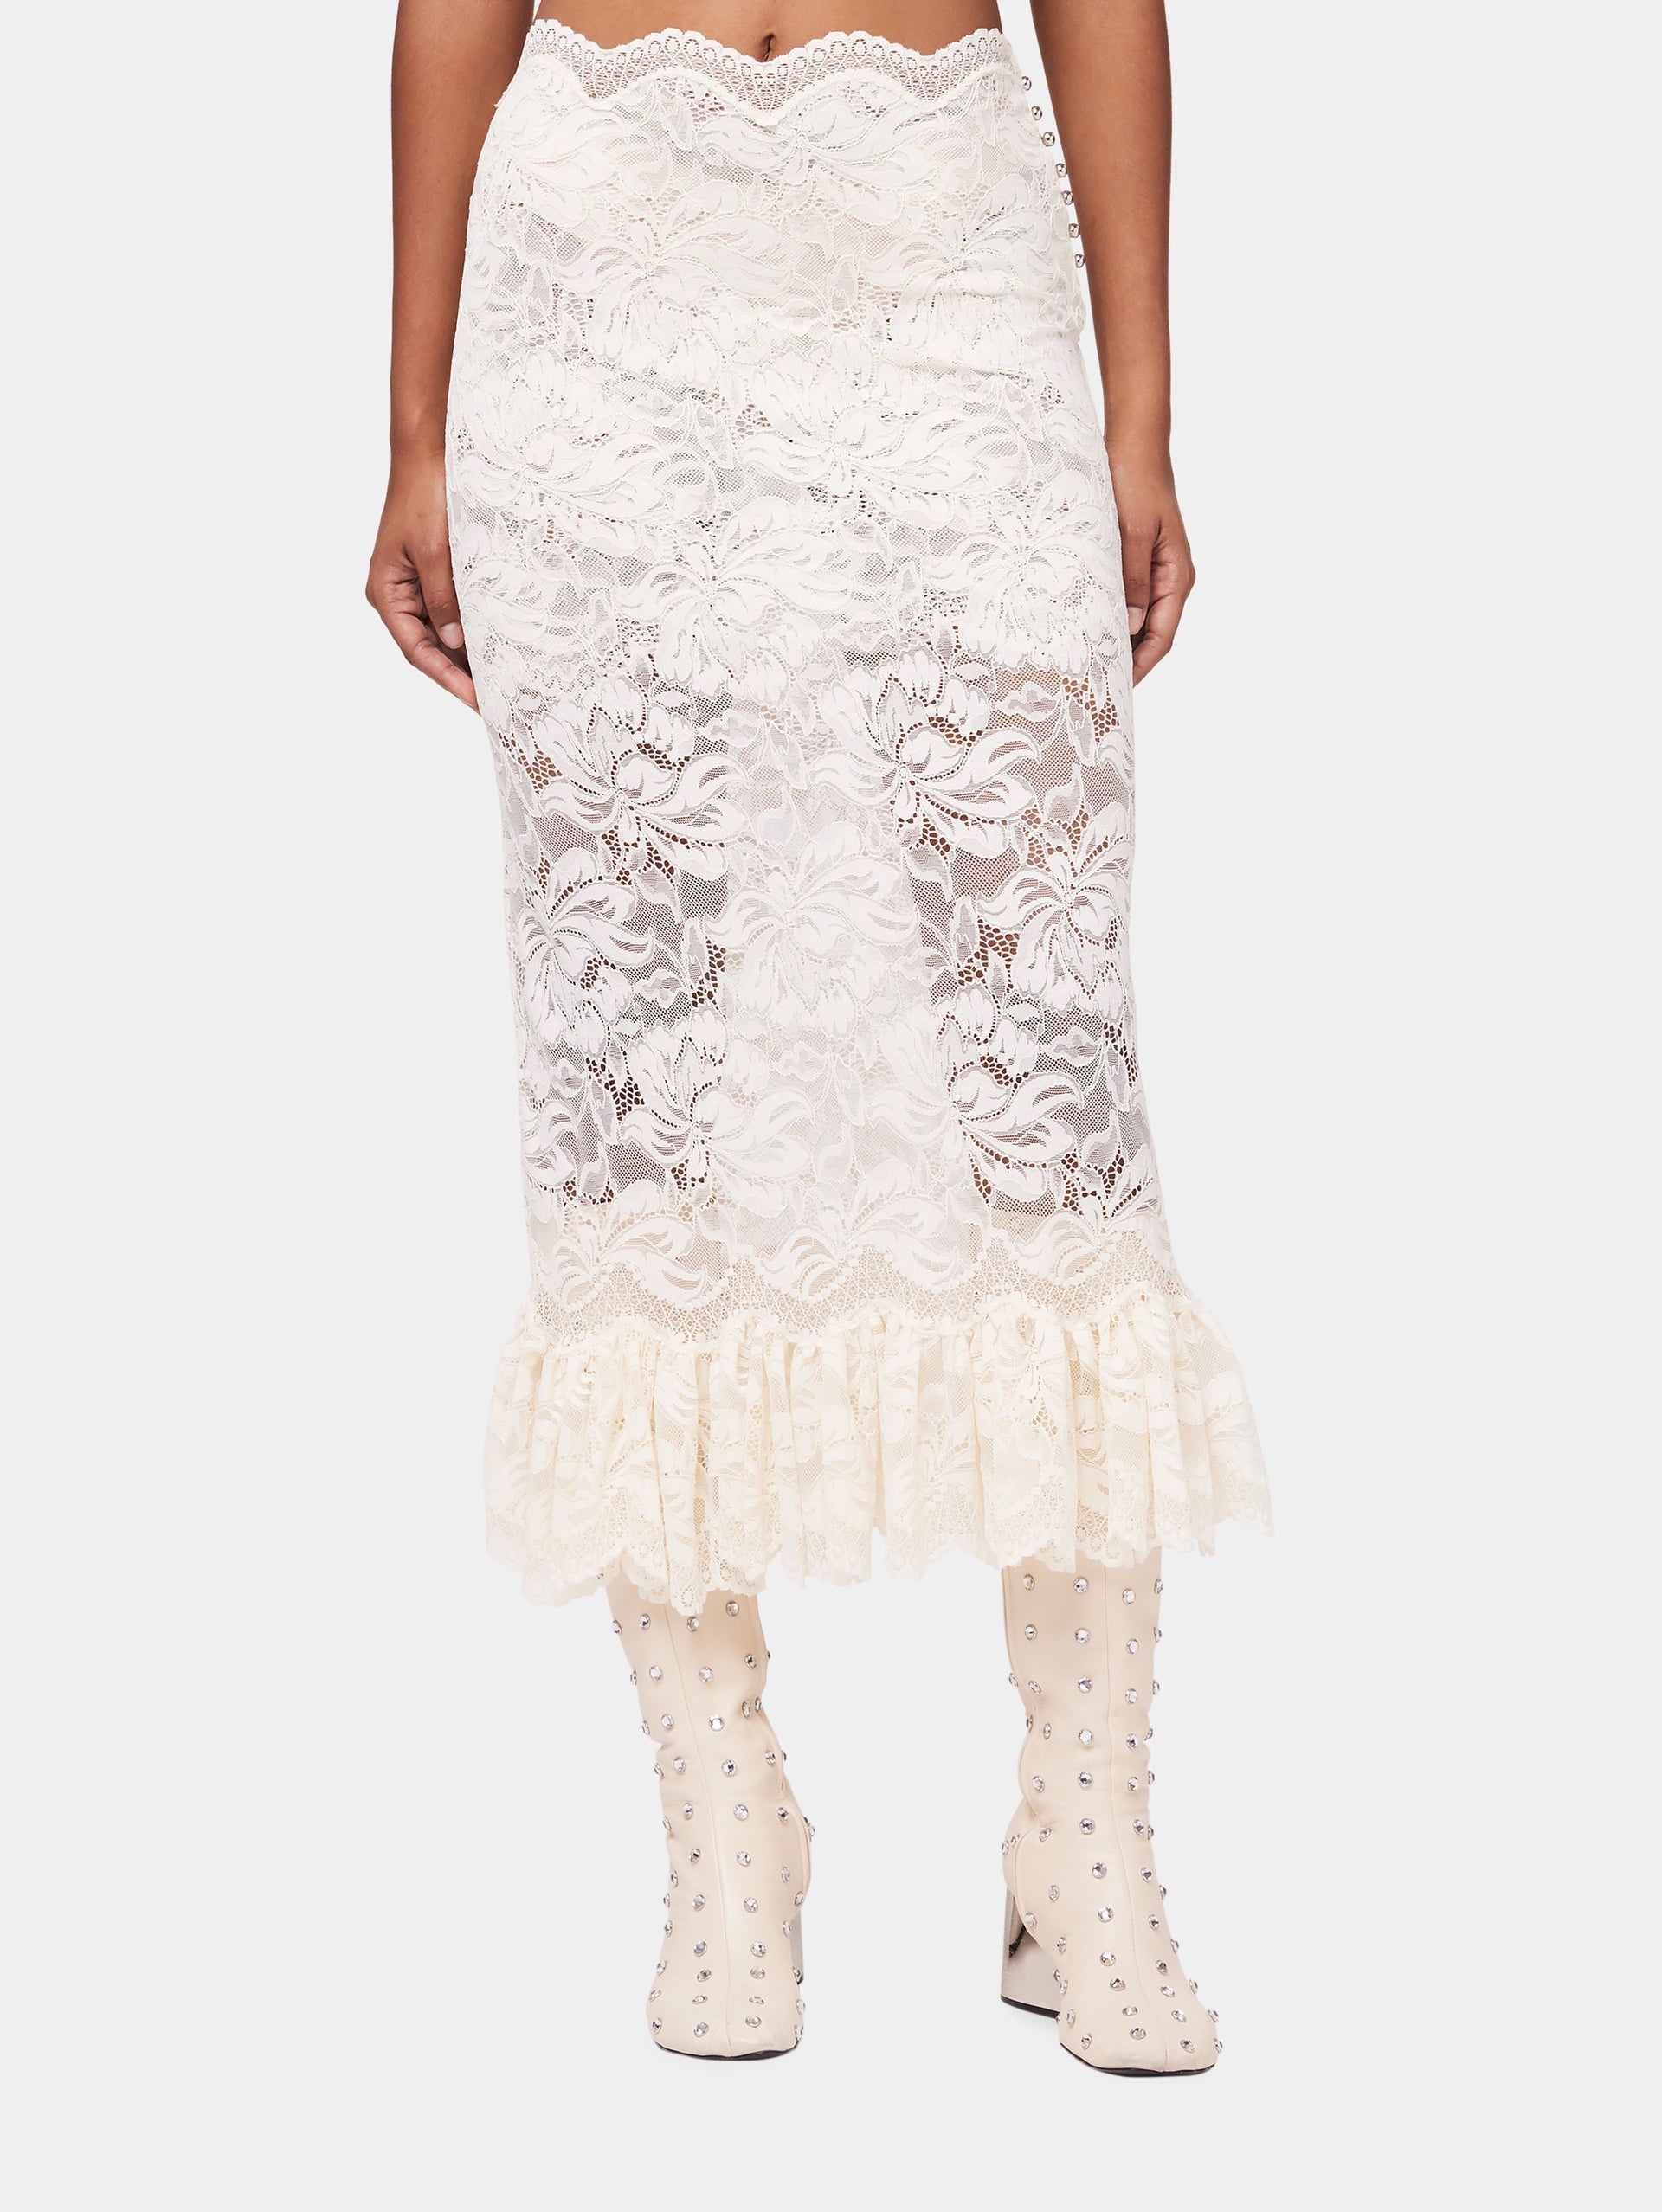 MAXI STRETCH LACE IVORY SKIRT - 3